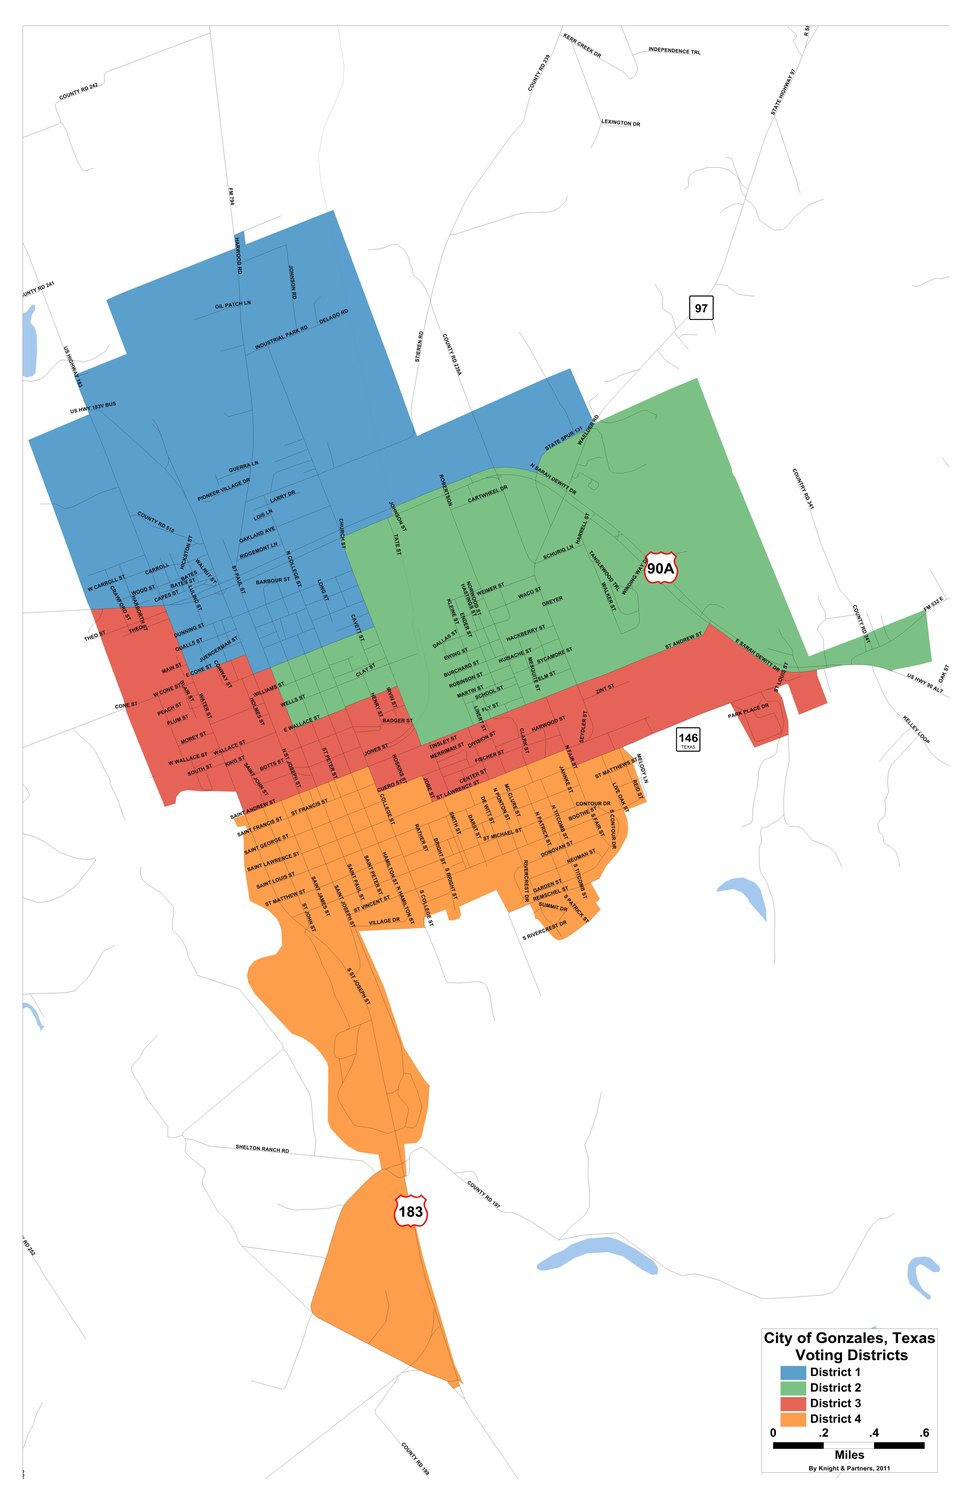 This maps shows the boundaries for the four council districts in Gonzales.